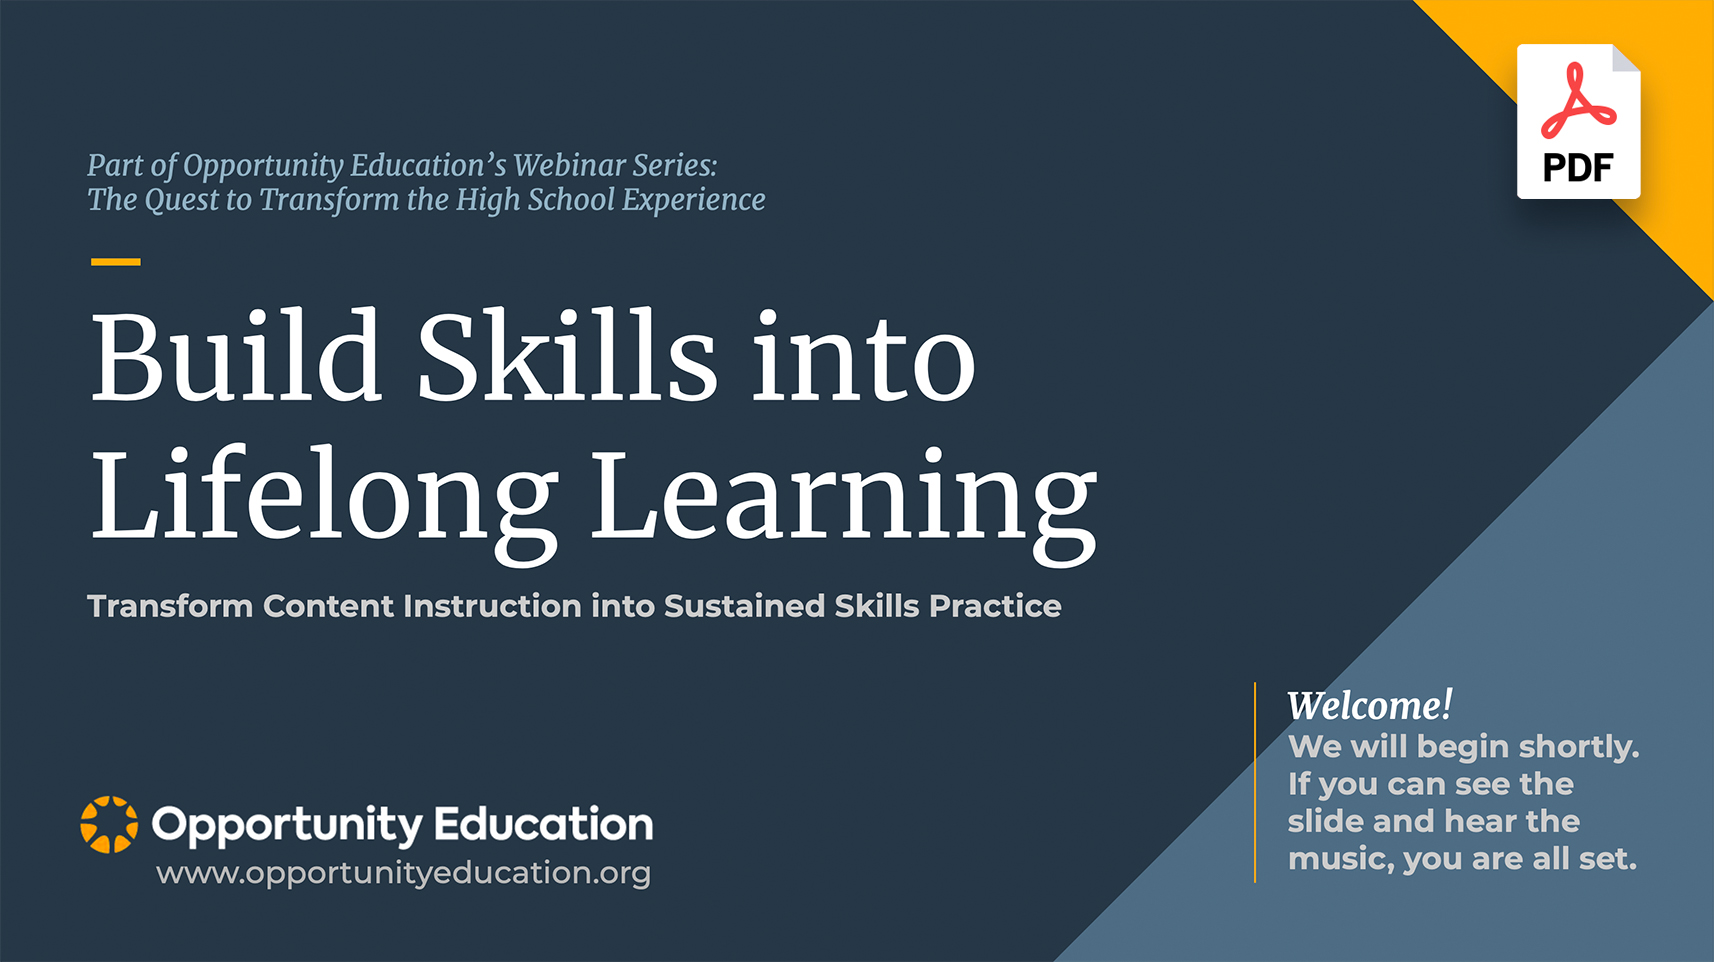 The cover of the slide deck for Opportunity Education's webinar, "Build Skills into Lifelong Learning"